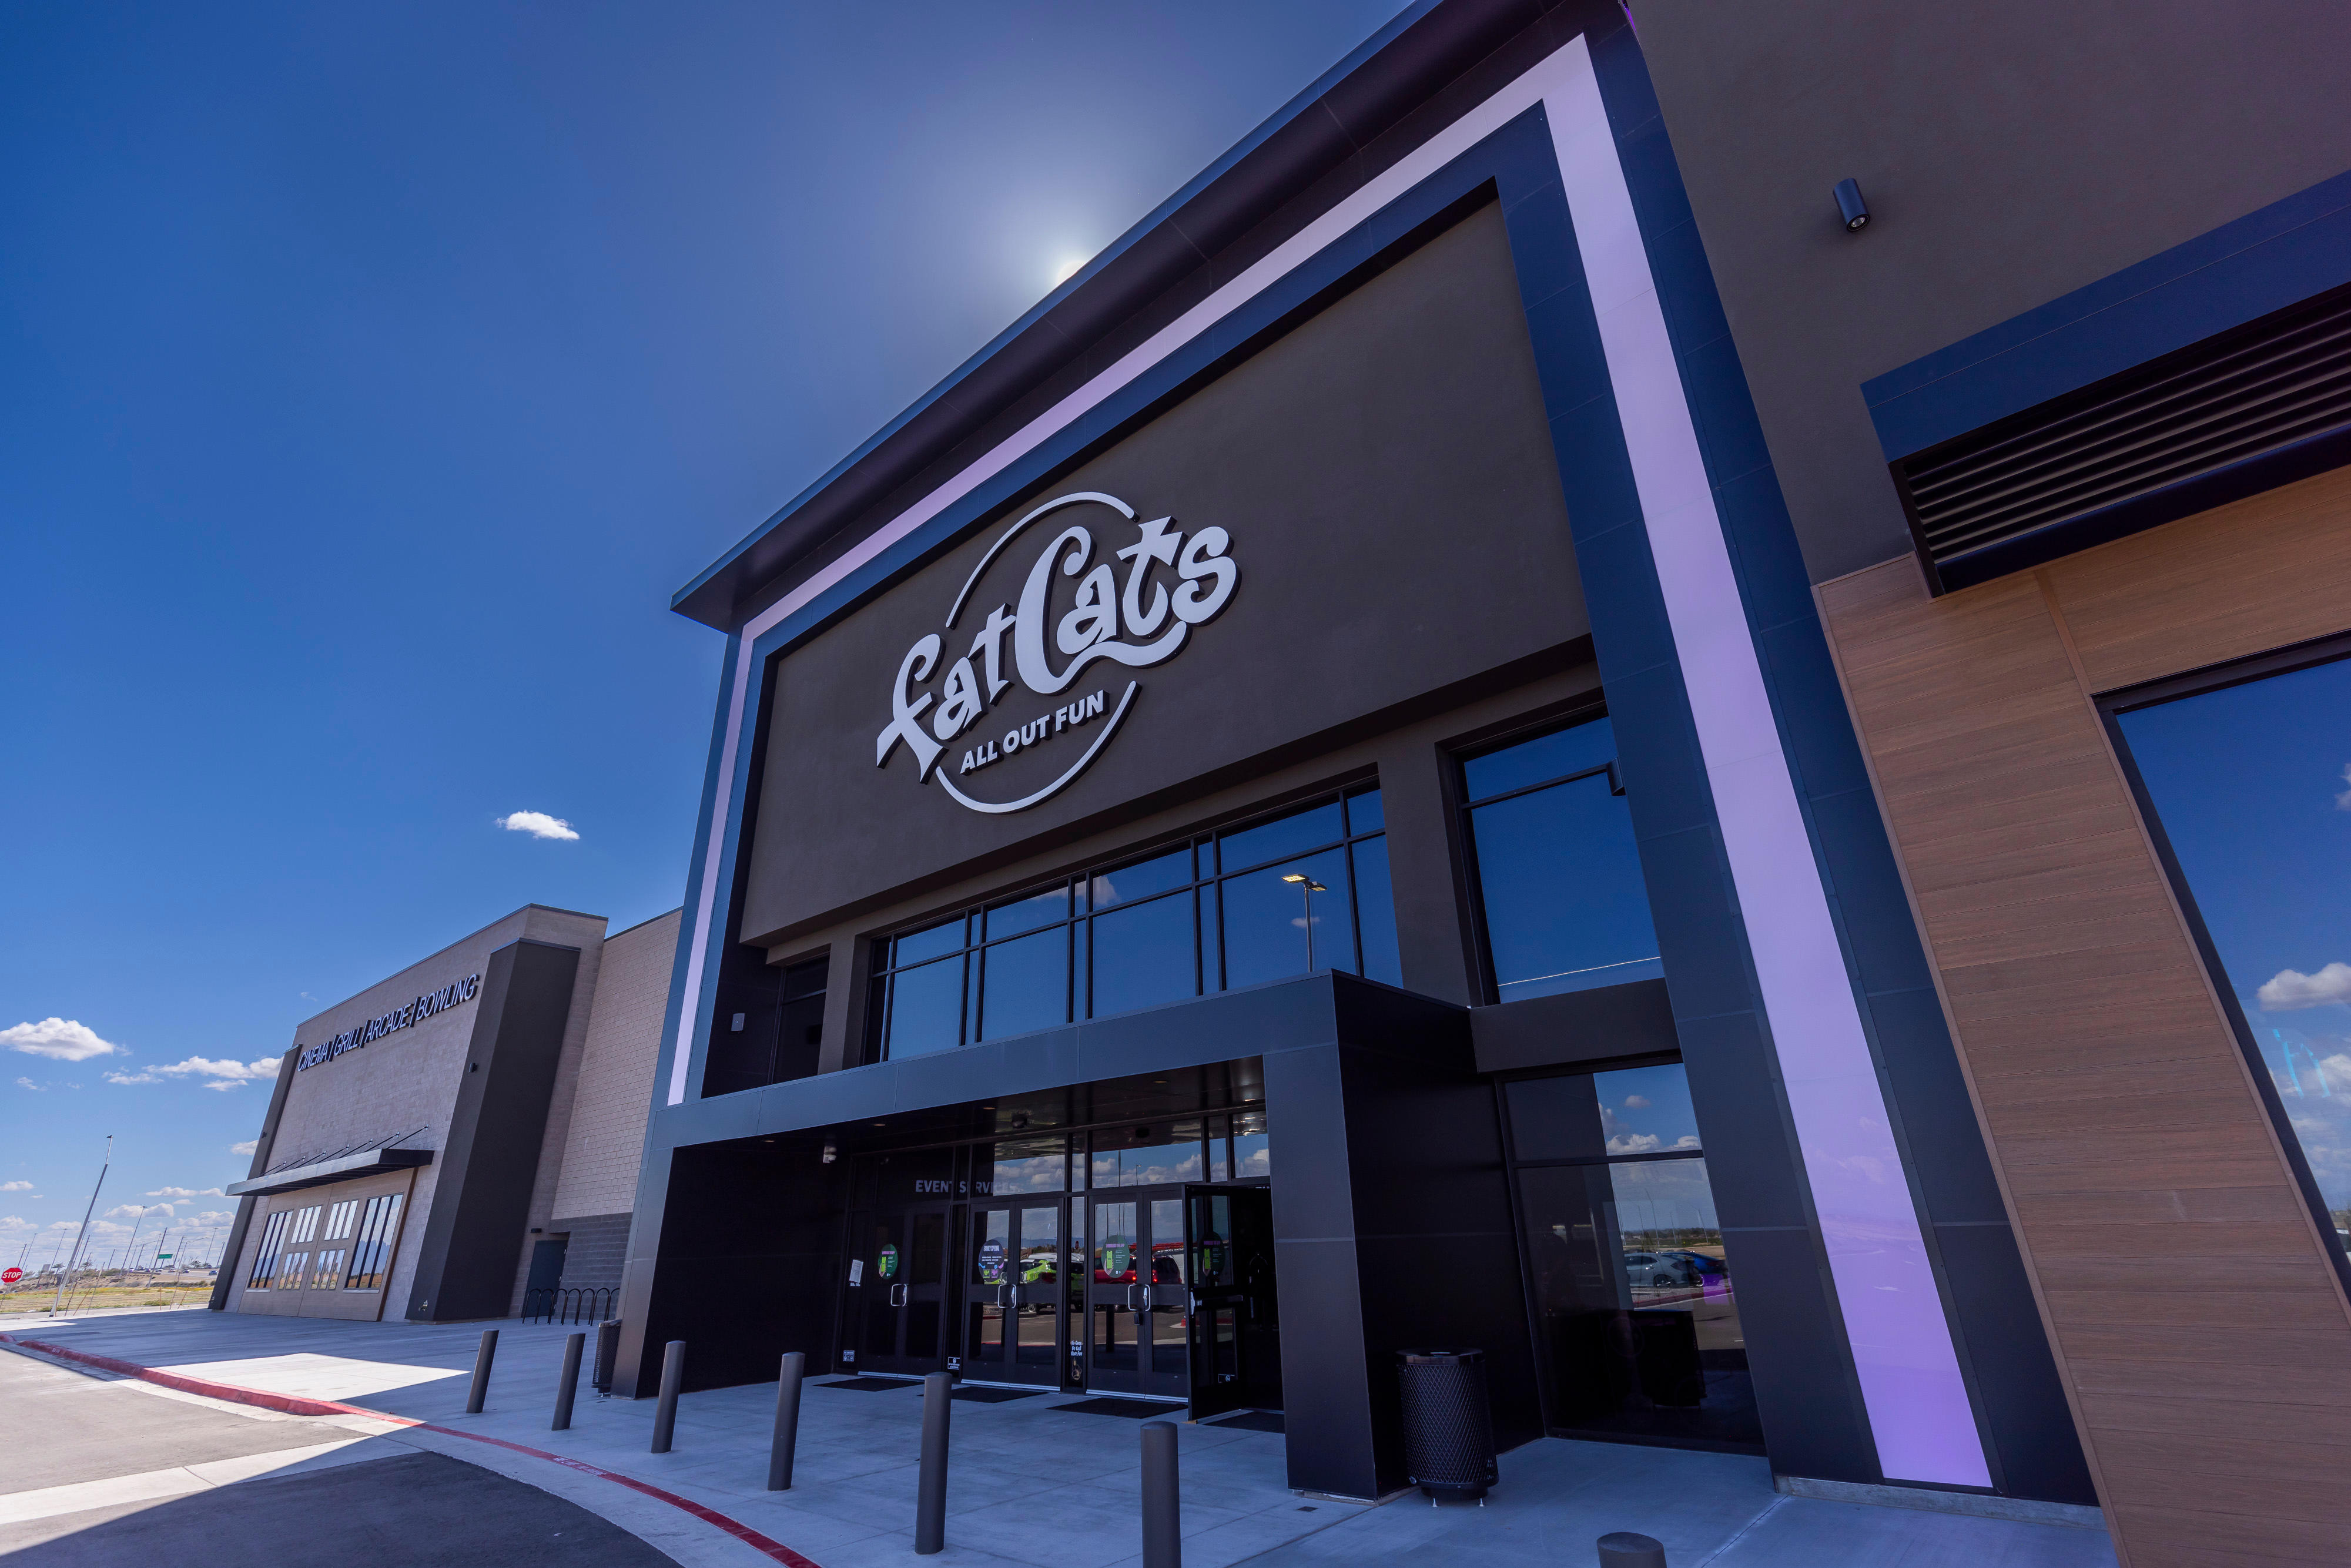 Fat Cats Family Entertainment center opens their fourth Arizona location in Surprise. The new 61,000-square-foot venue will be located within the Village at Prasada, an outdoor shopping, entertainment, and restaurant center with stores and restaurants.